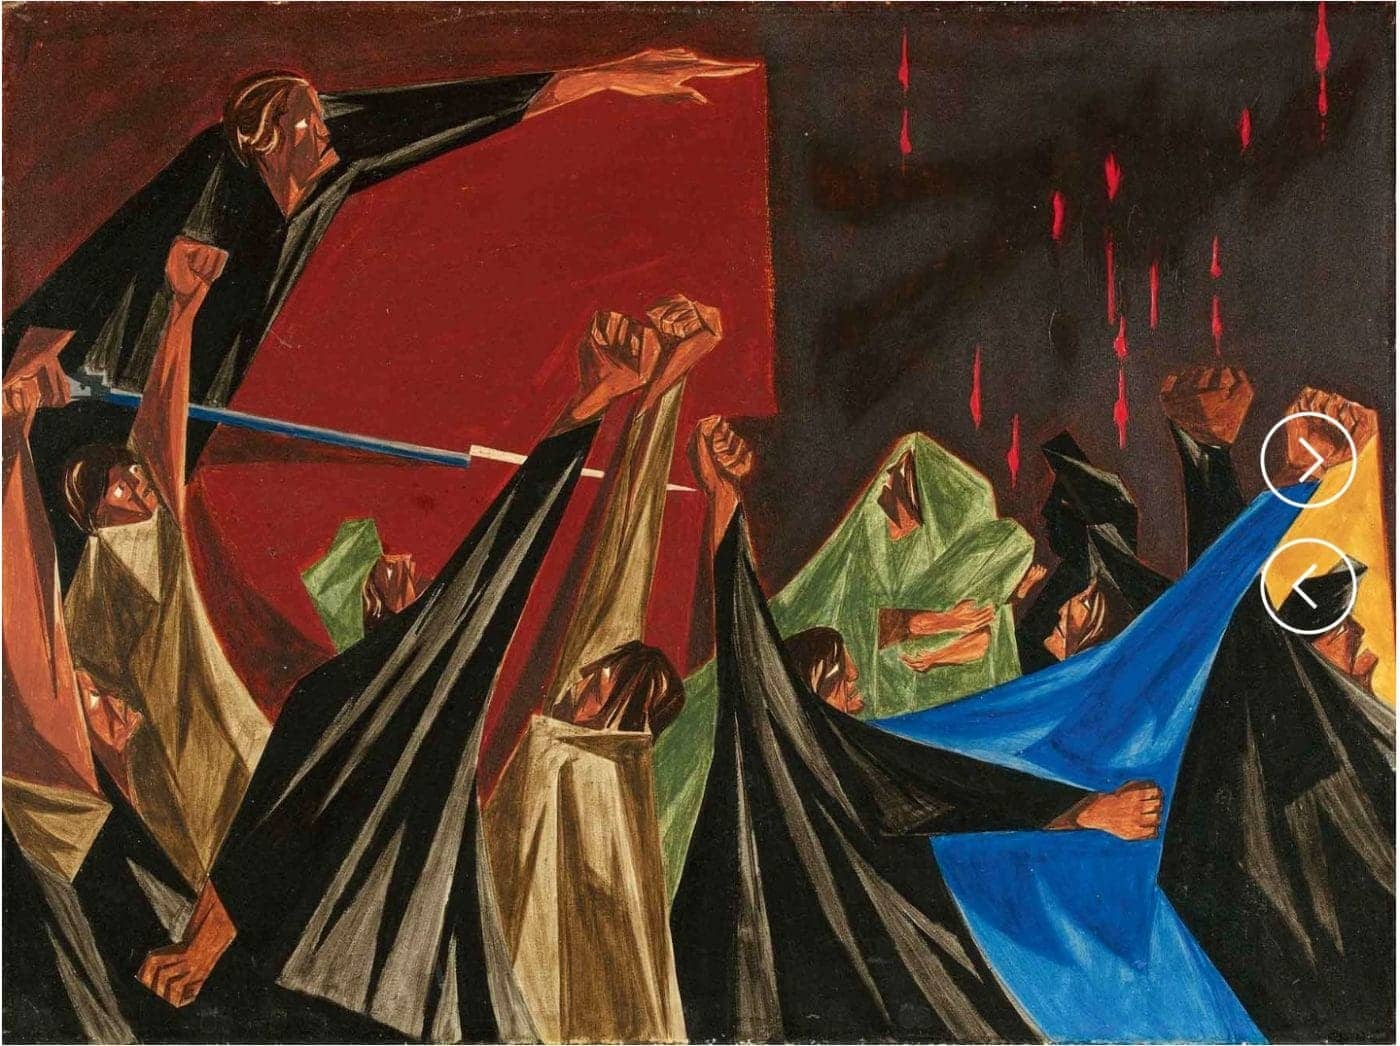 The-American-struggle-series-Jacob-Lawrence-1400x1046, Hidden truths: Taxpayers encouraging inhumanity in Texas?, Behind Enemy Lines 